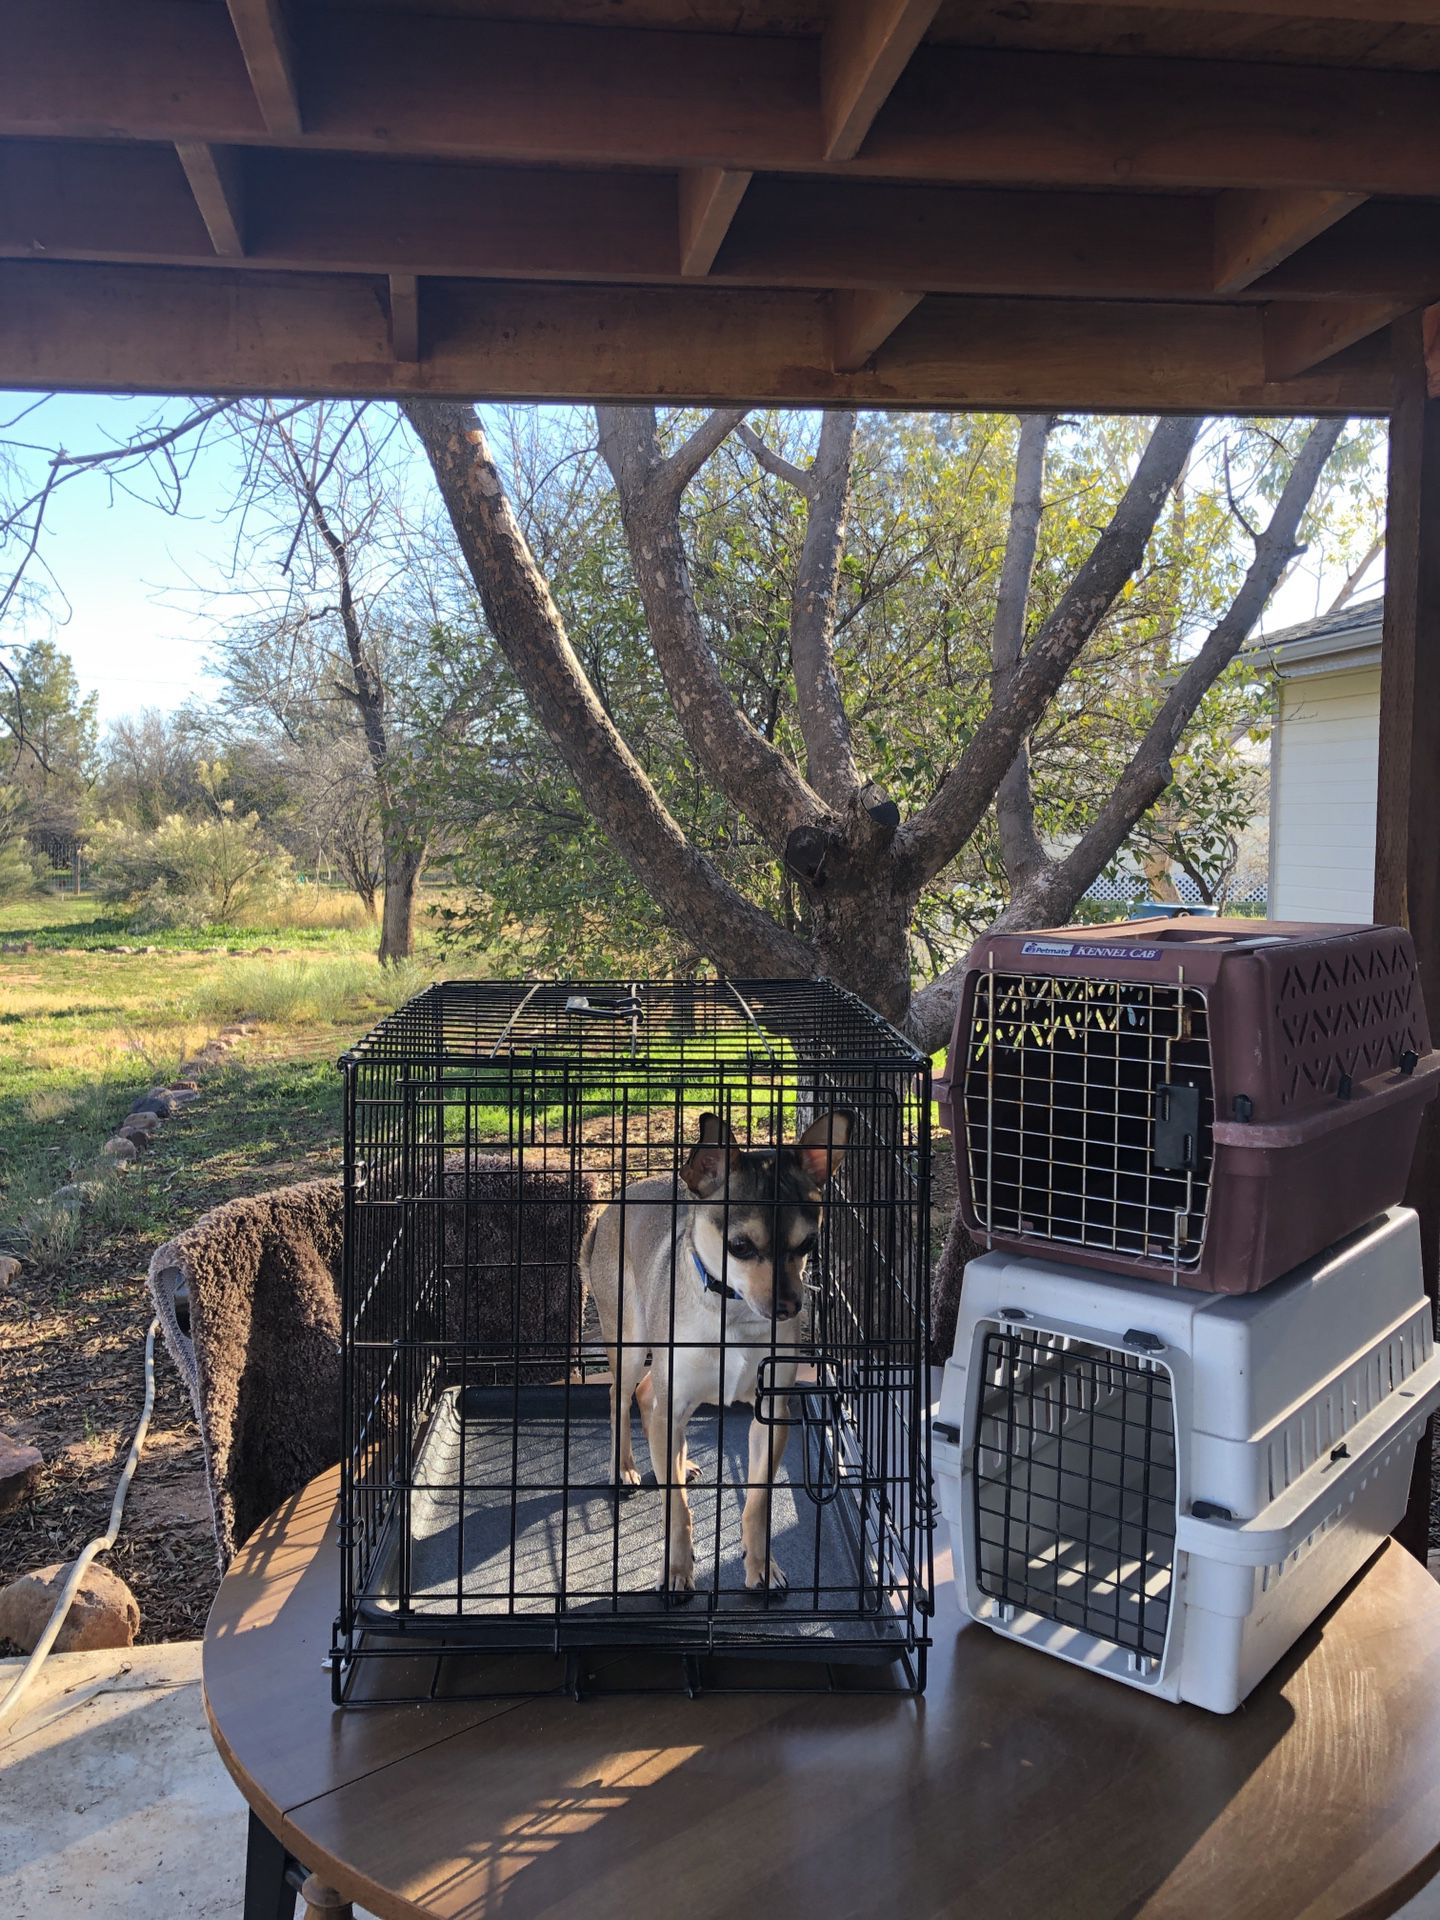 Small kennel and carriers